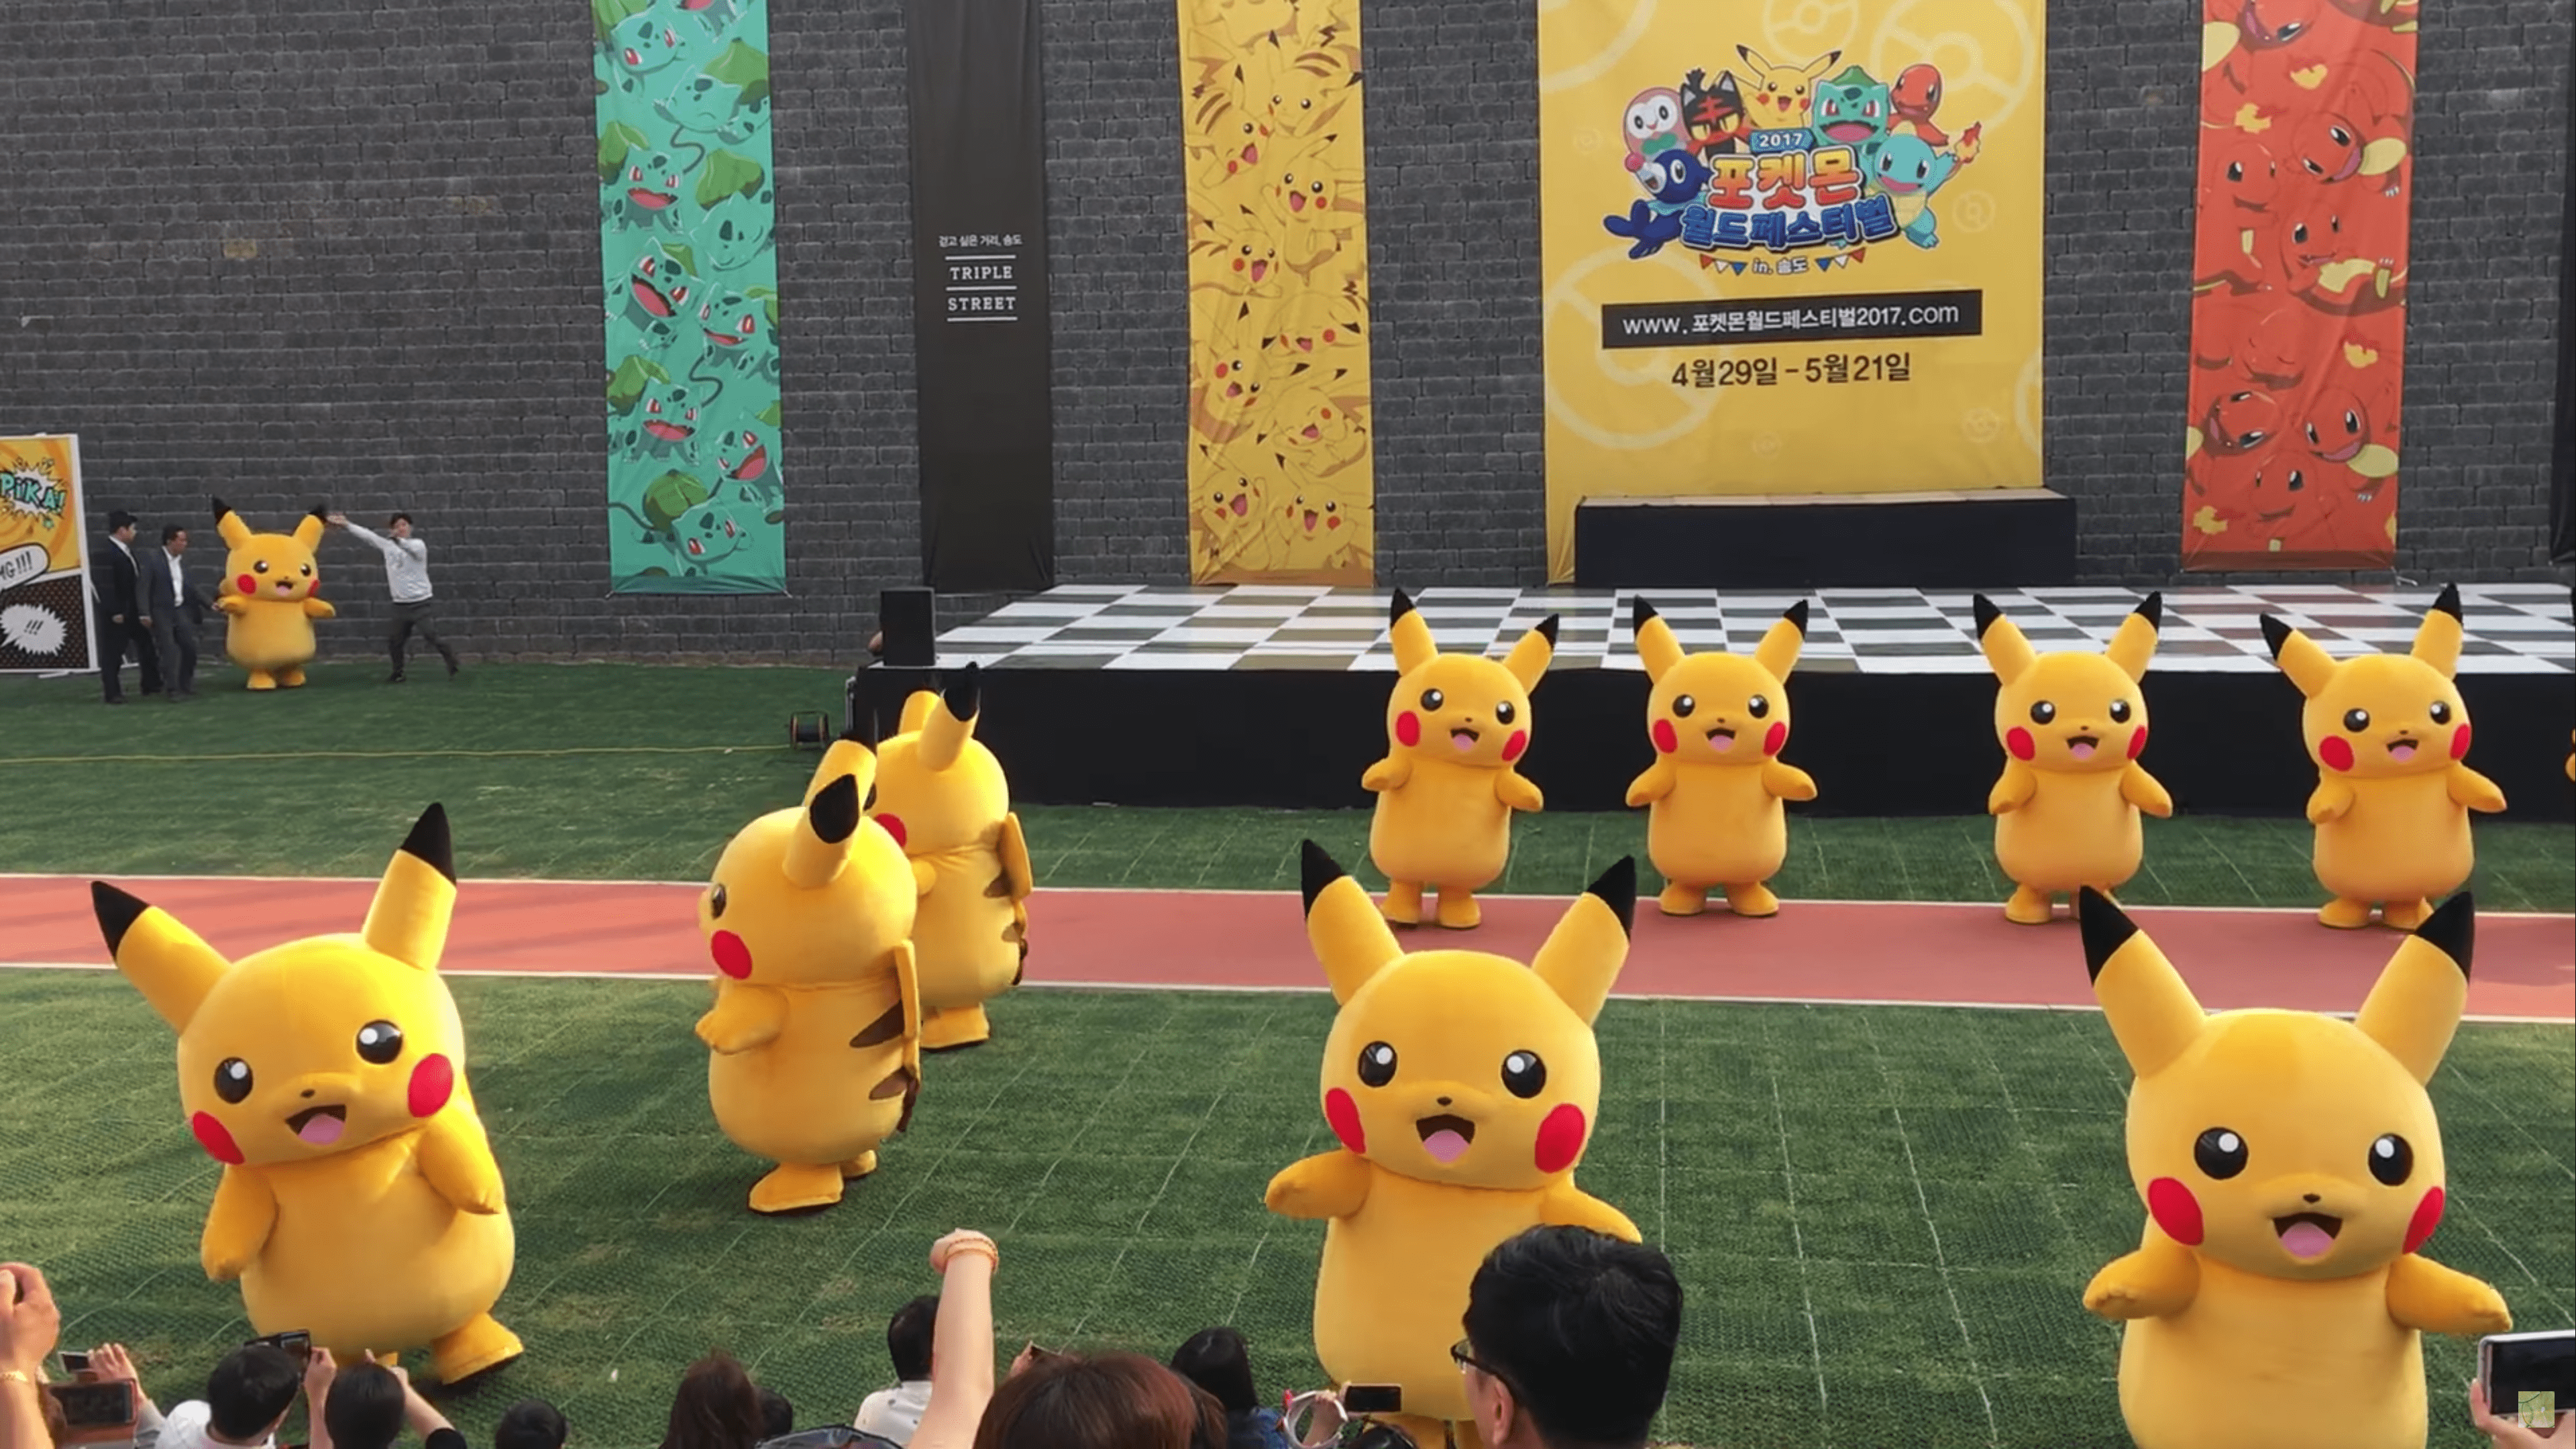 Rapidly Deflating Pikachu Rushed To Safety By Small Horde Of Suited Men